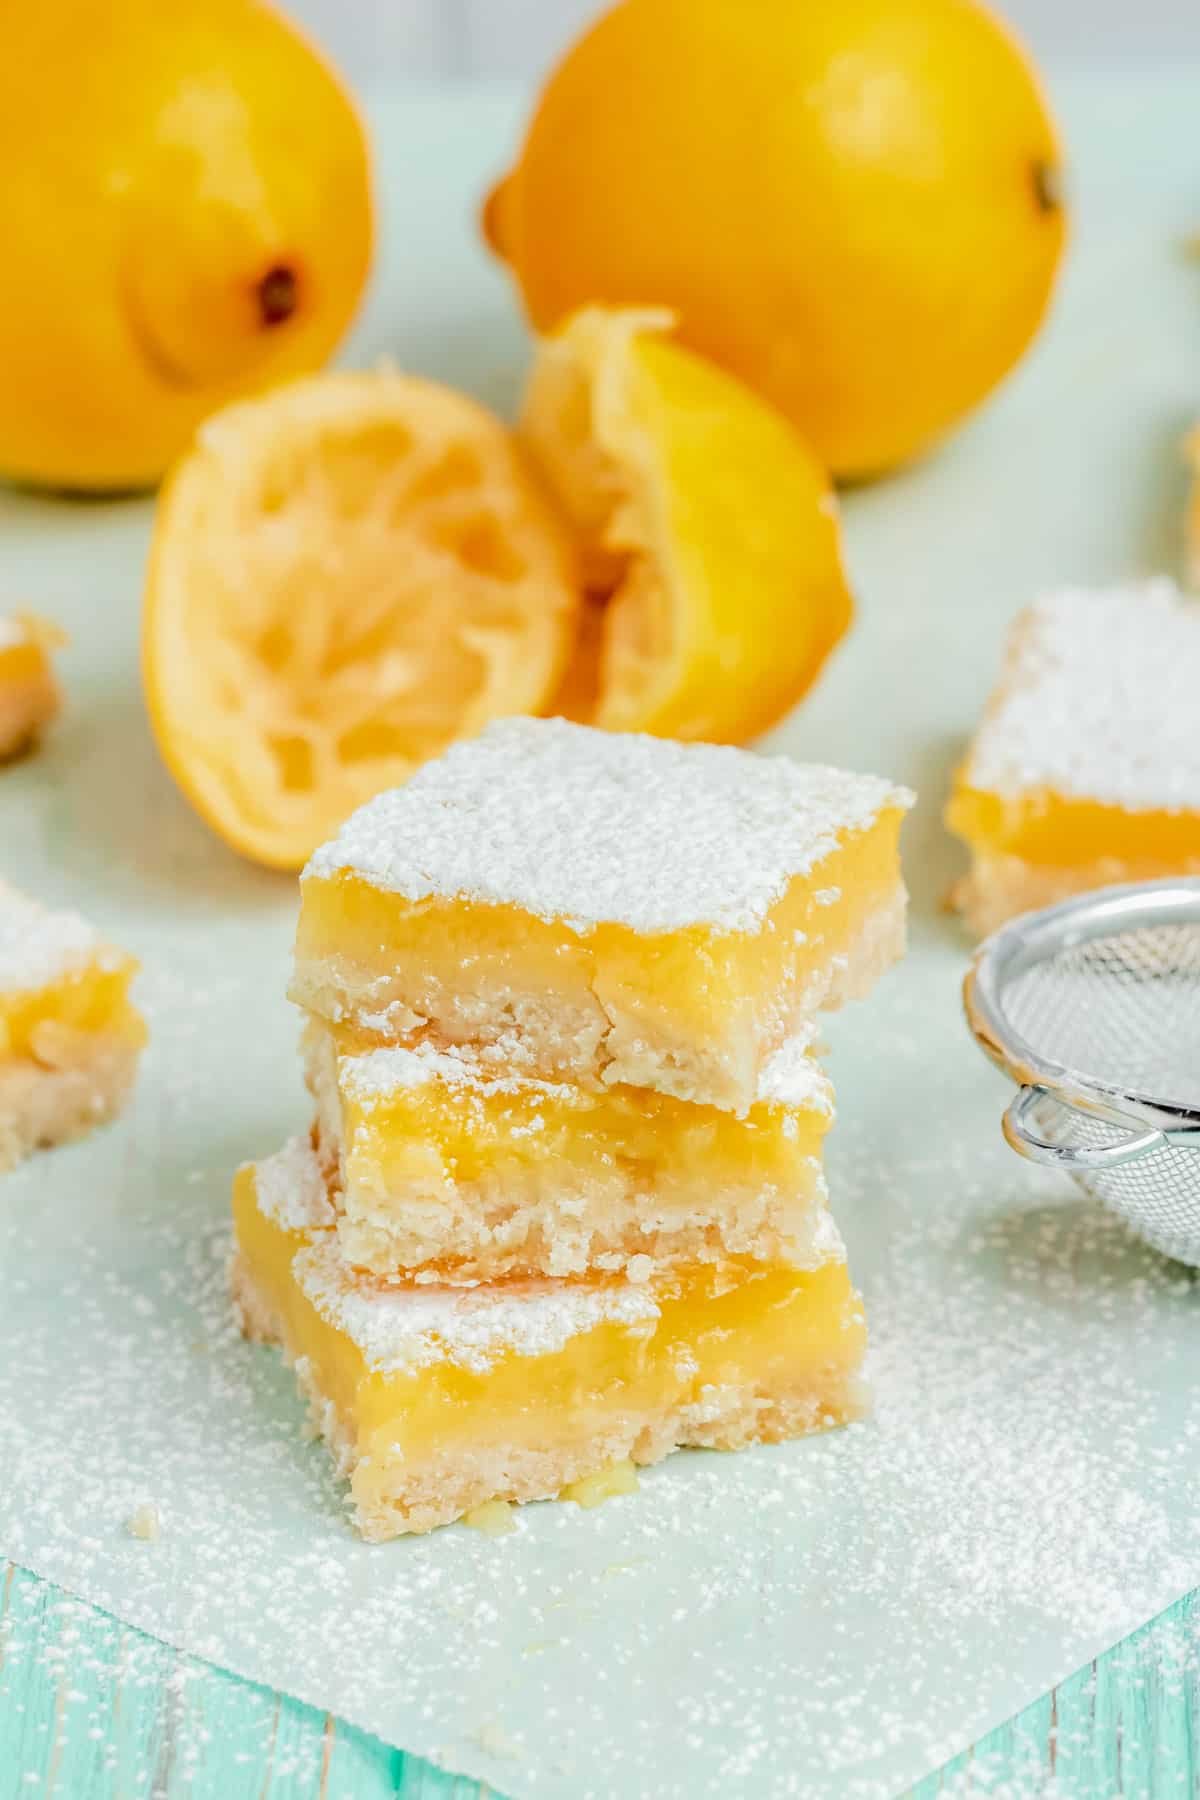 3 lemon bars stacked on top of each other.